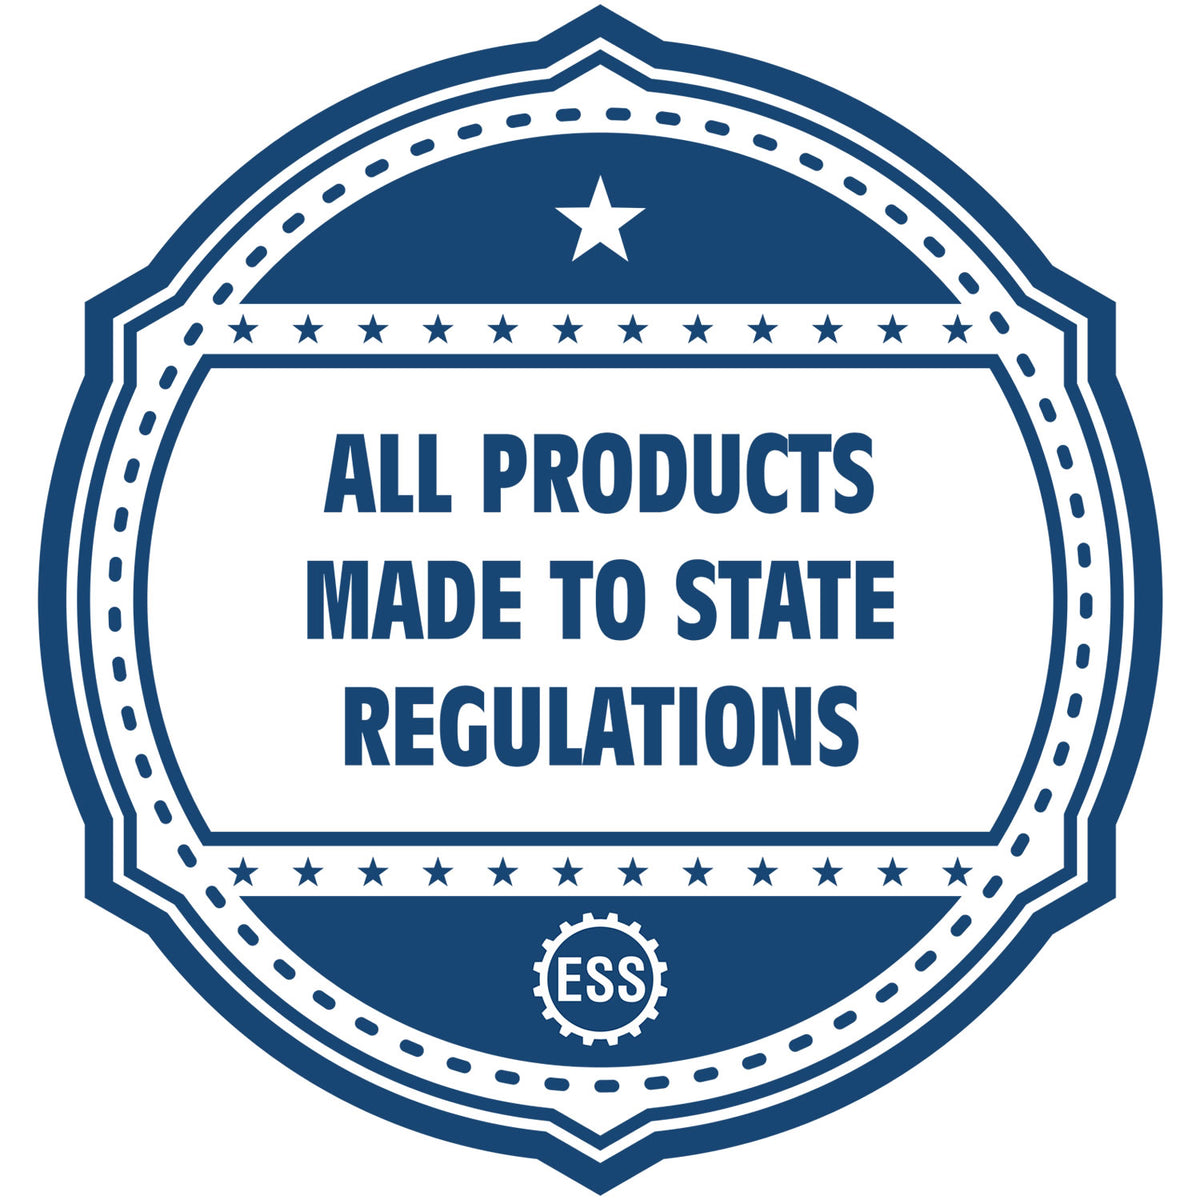 An icon or badge element for the Super Slim Iowa Notary Public Stamp showing that this product is made in compliance with state regulations.